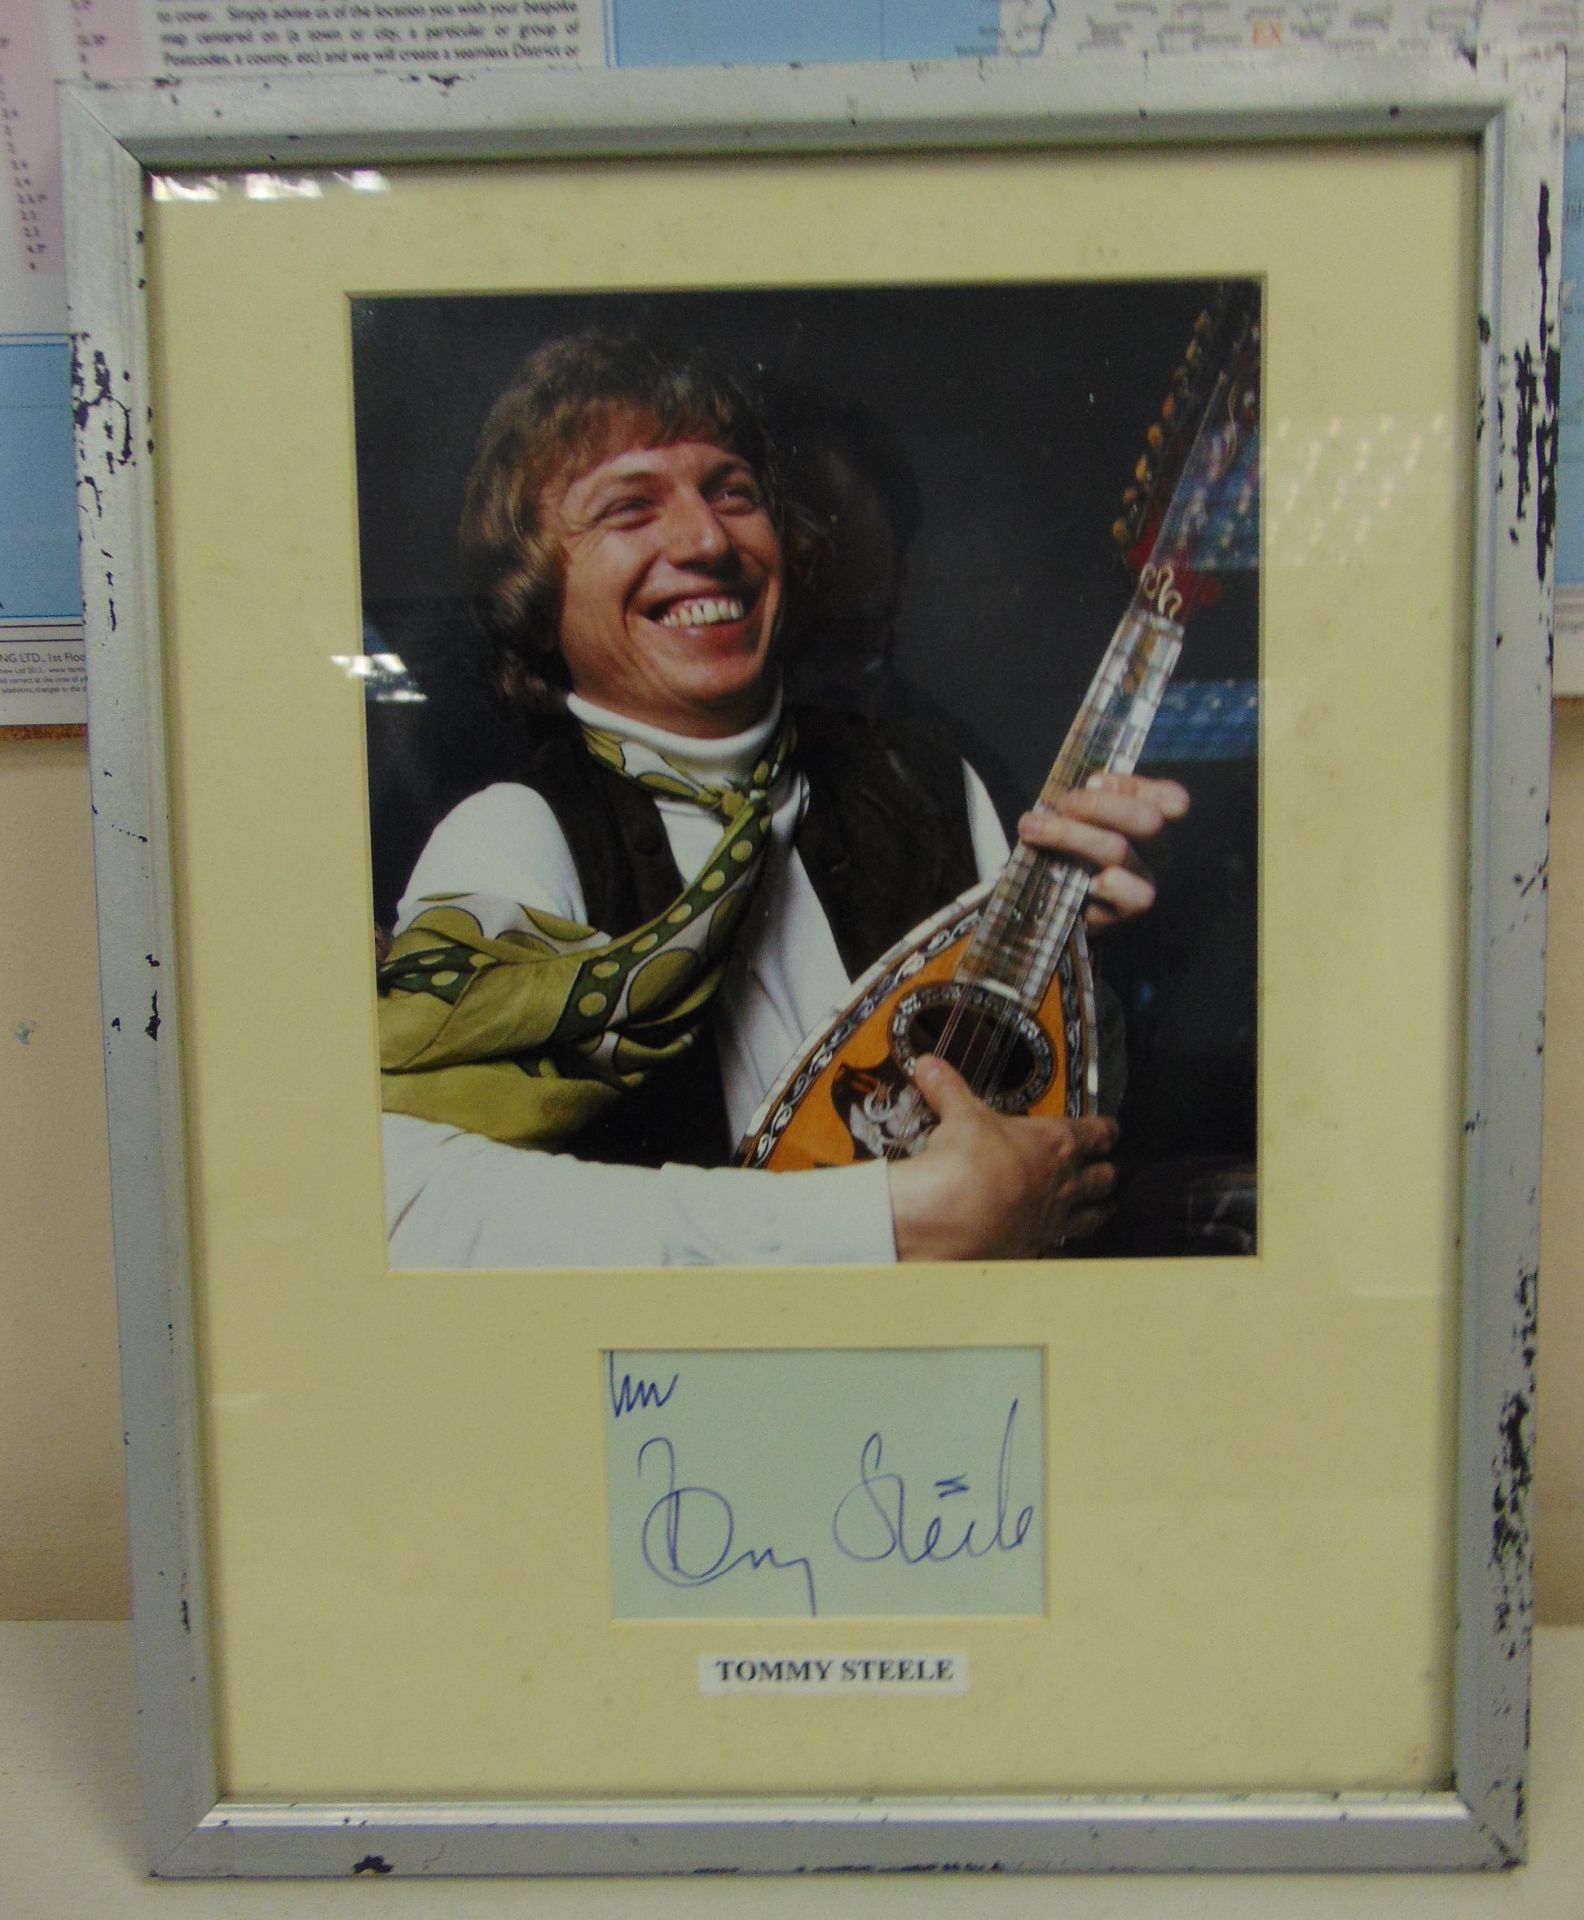 Tommy Steele Framed Photo With Signature - Image 2 of 3